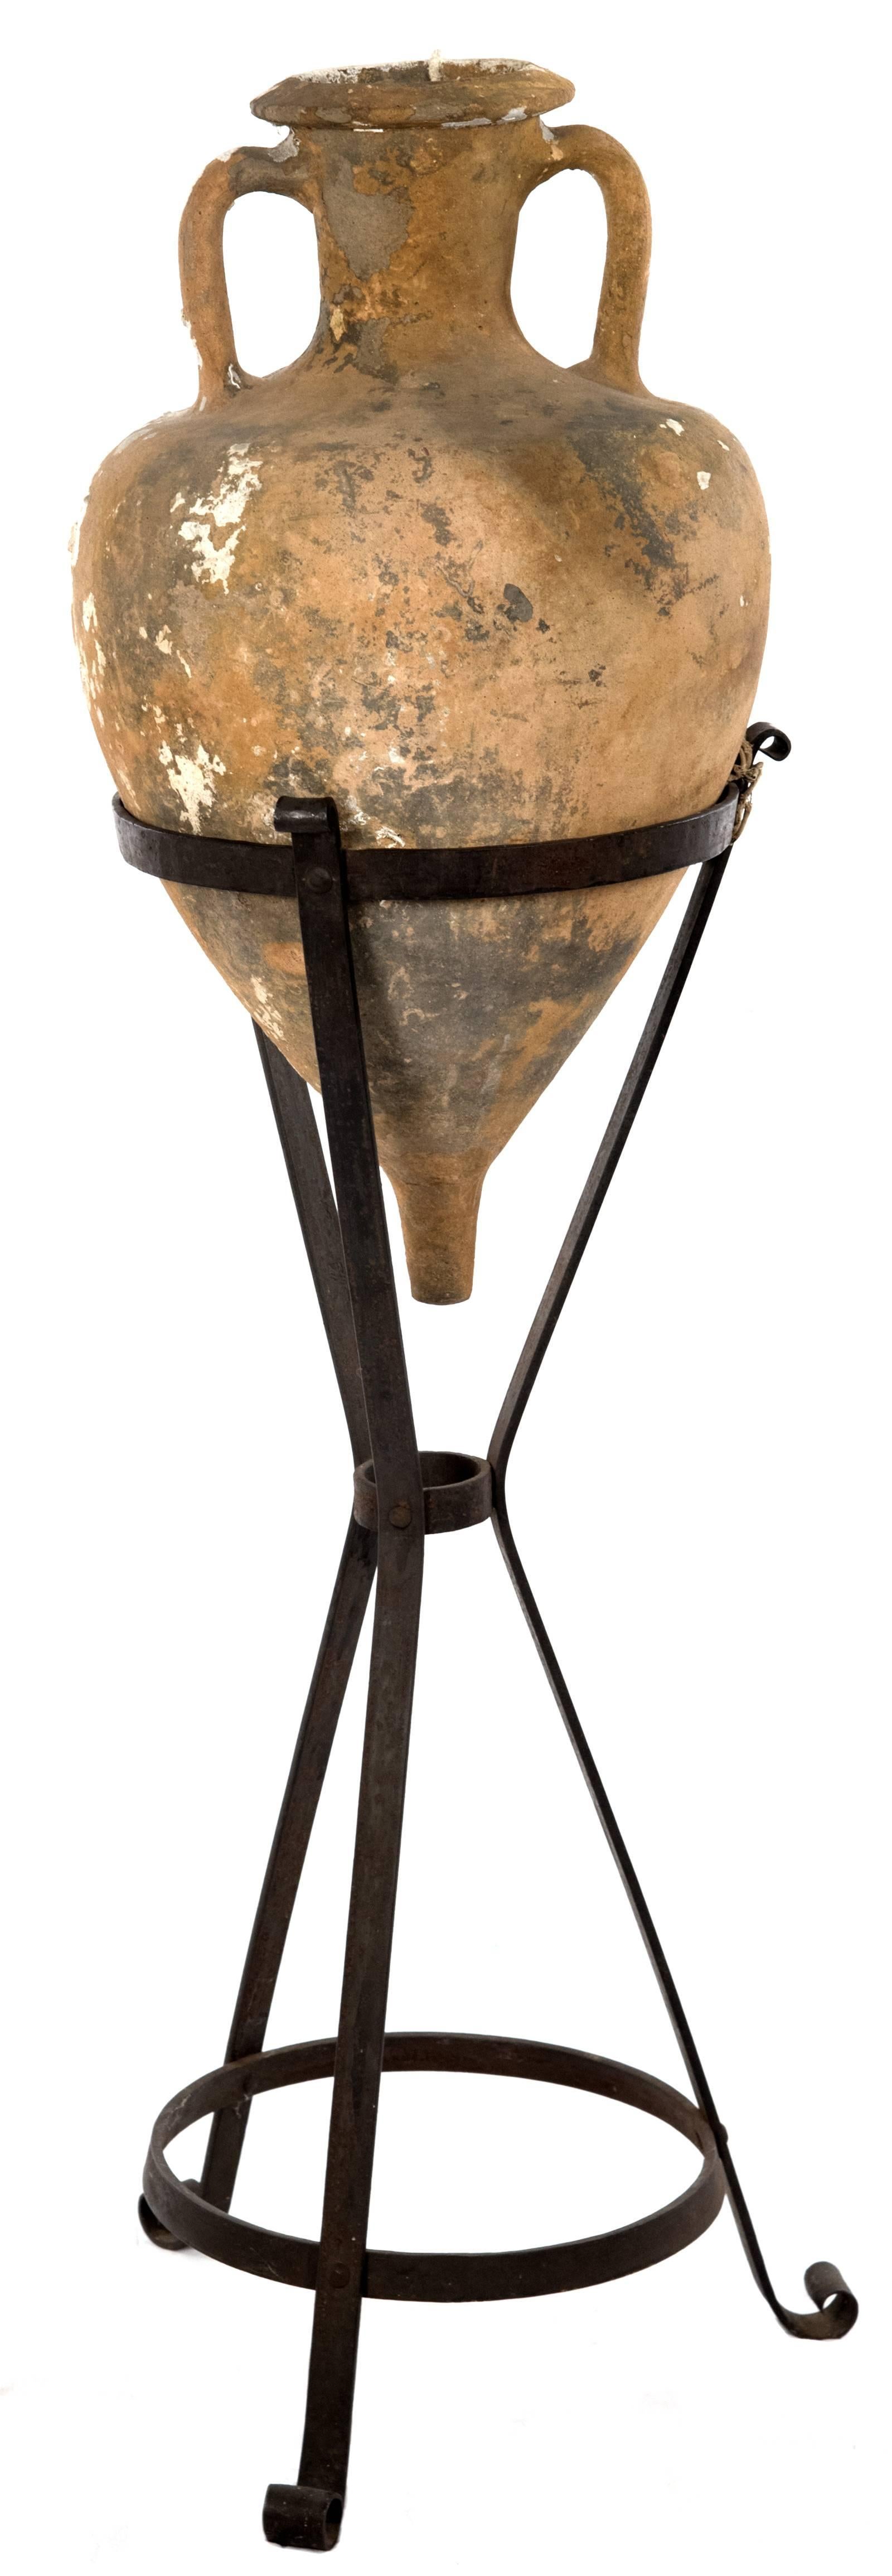 A Greco-Italic terracotta Amphora with cylindrical neck with two side handles, of a globular and V-shaped form with the body tapering into a cylindrical pointed spike at its base. The Amphora is supported on wrought iron conical tripod Stand.

